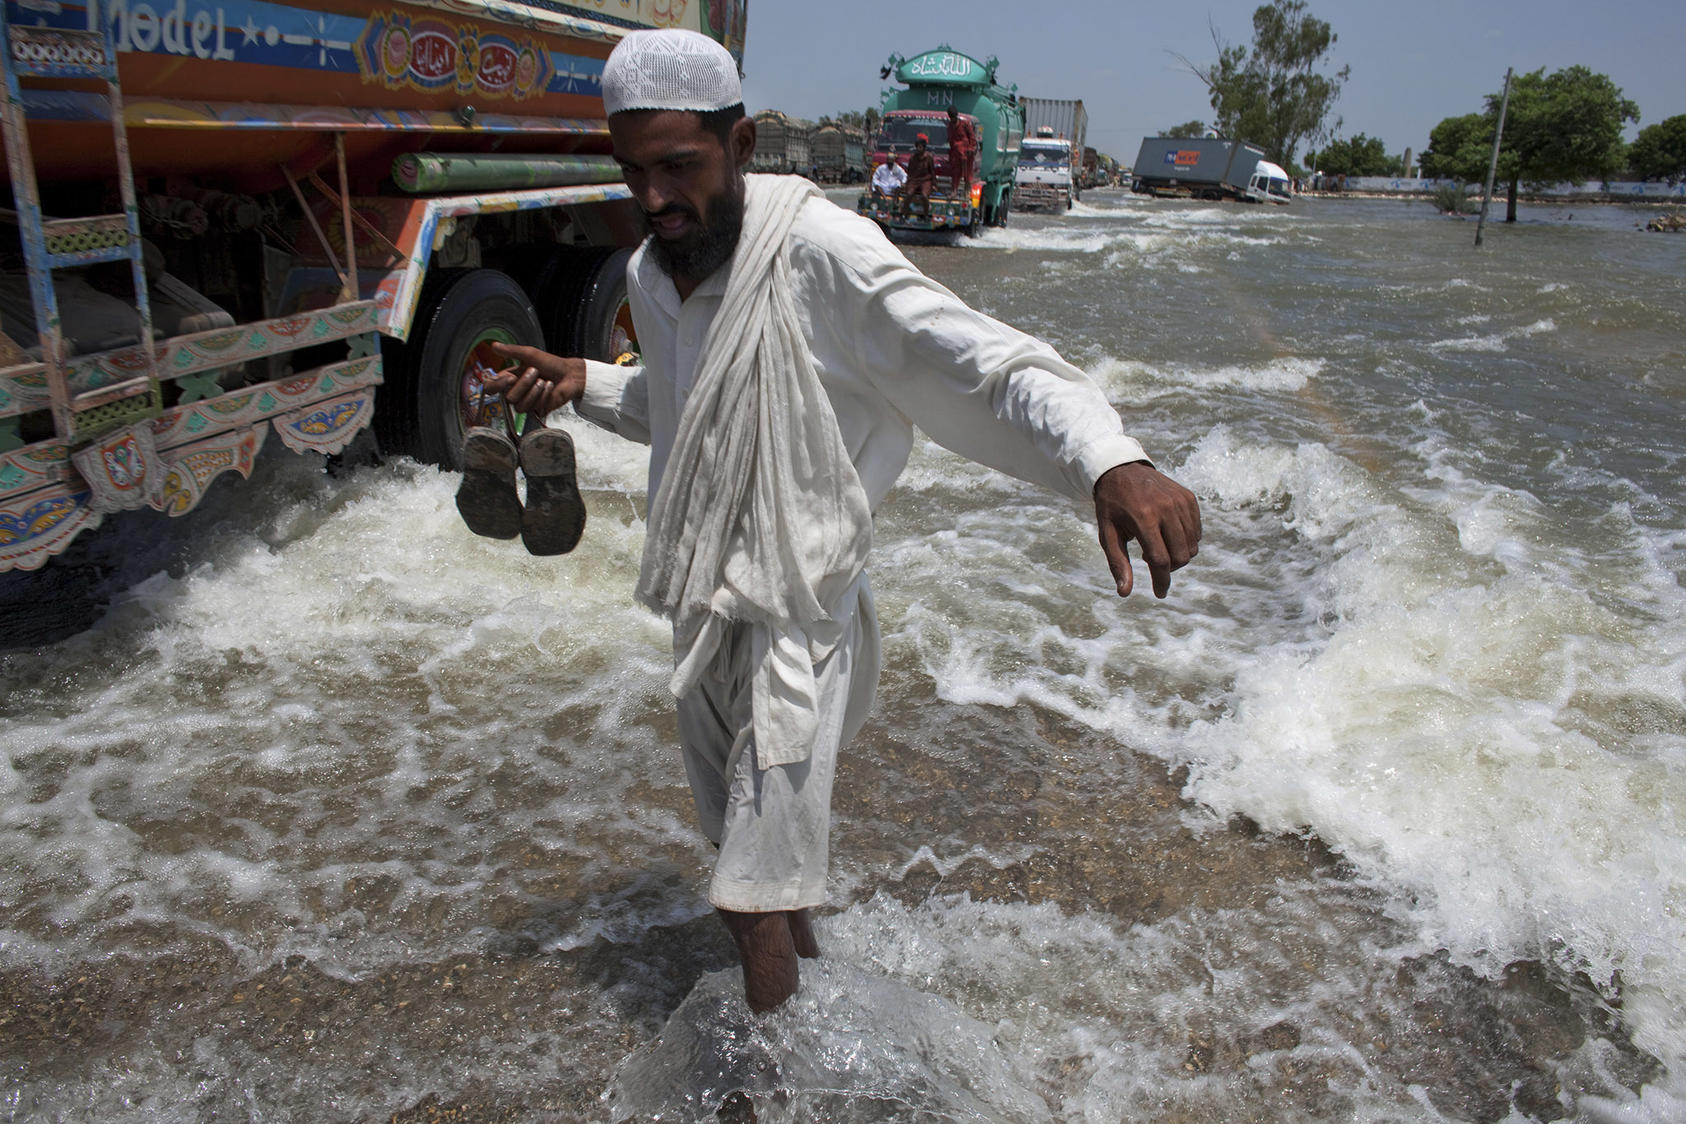 A Pakistani man walks across the main highway on the border of the Sindh and Punjab provinces of southern Pakistan, Aug. 22, 2010. With five million people displaced by flooding and with aid scarce, anger at the Pakistani government is growing. (Tyler Hicks/The New York Times)